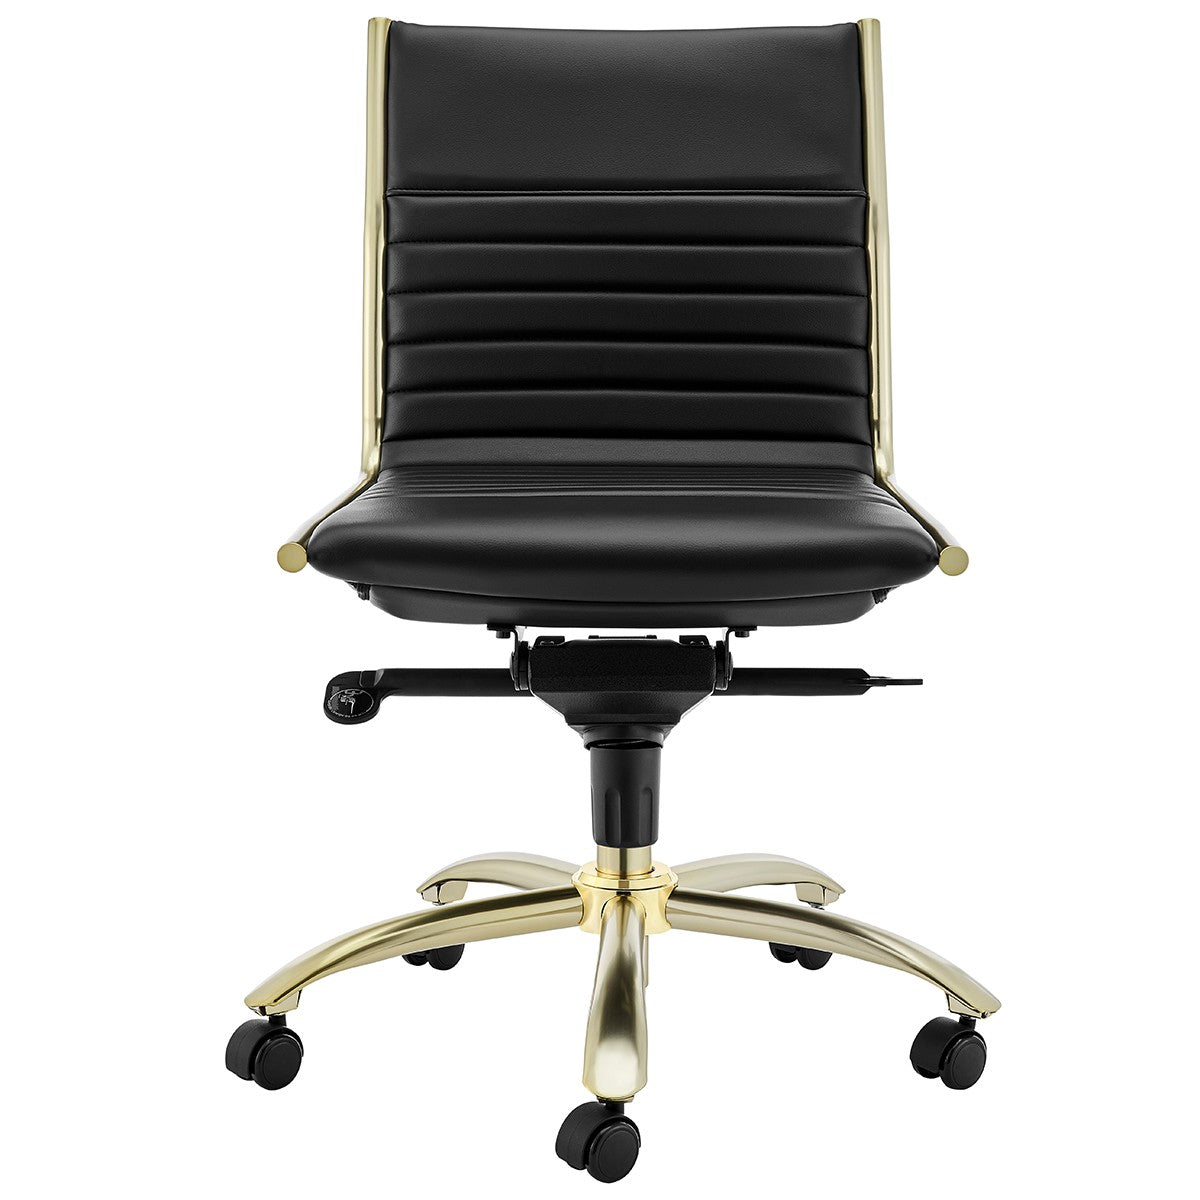 Black-Faux-Leather-Seat-Swivel-Adjustable-Executive-Chair-Leather-Back-Steel-Frame-Office-Chairs